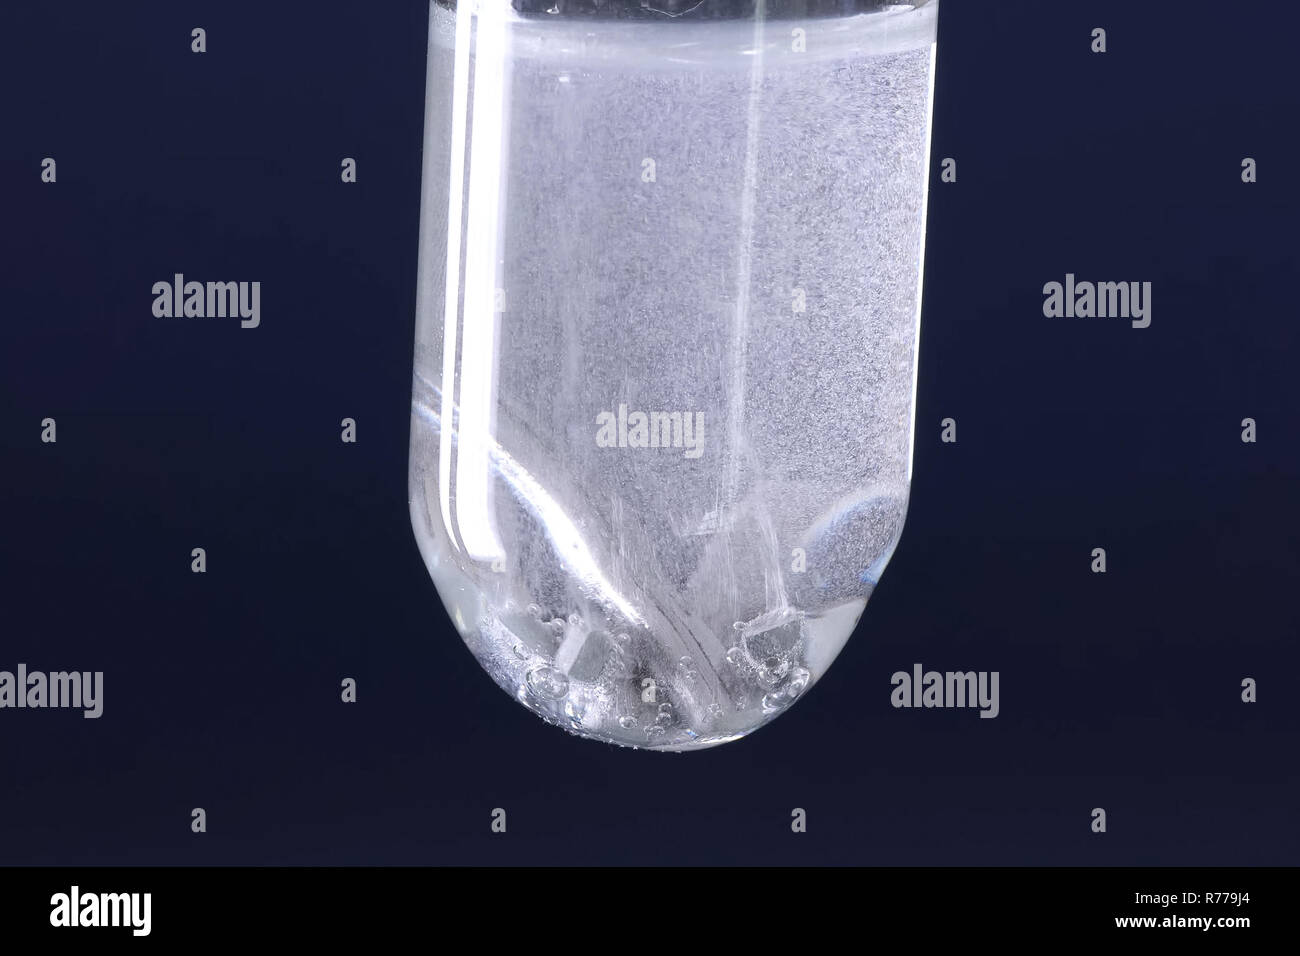 Allmium in vitro for chemical reactions. Tube the flask Stock Photo